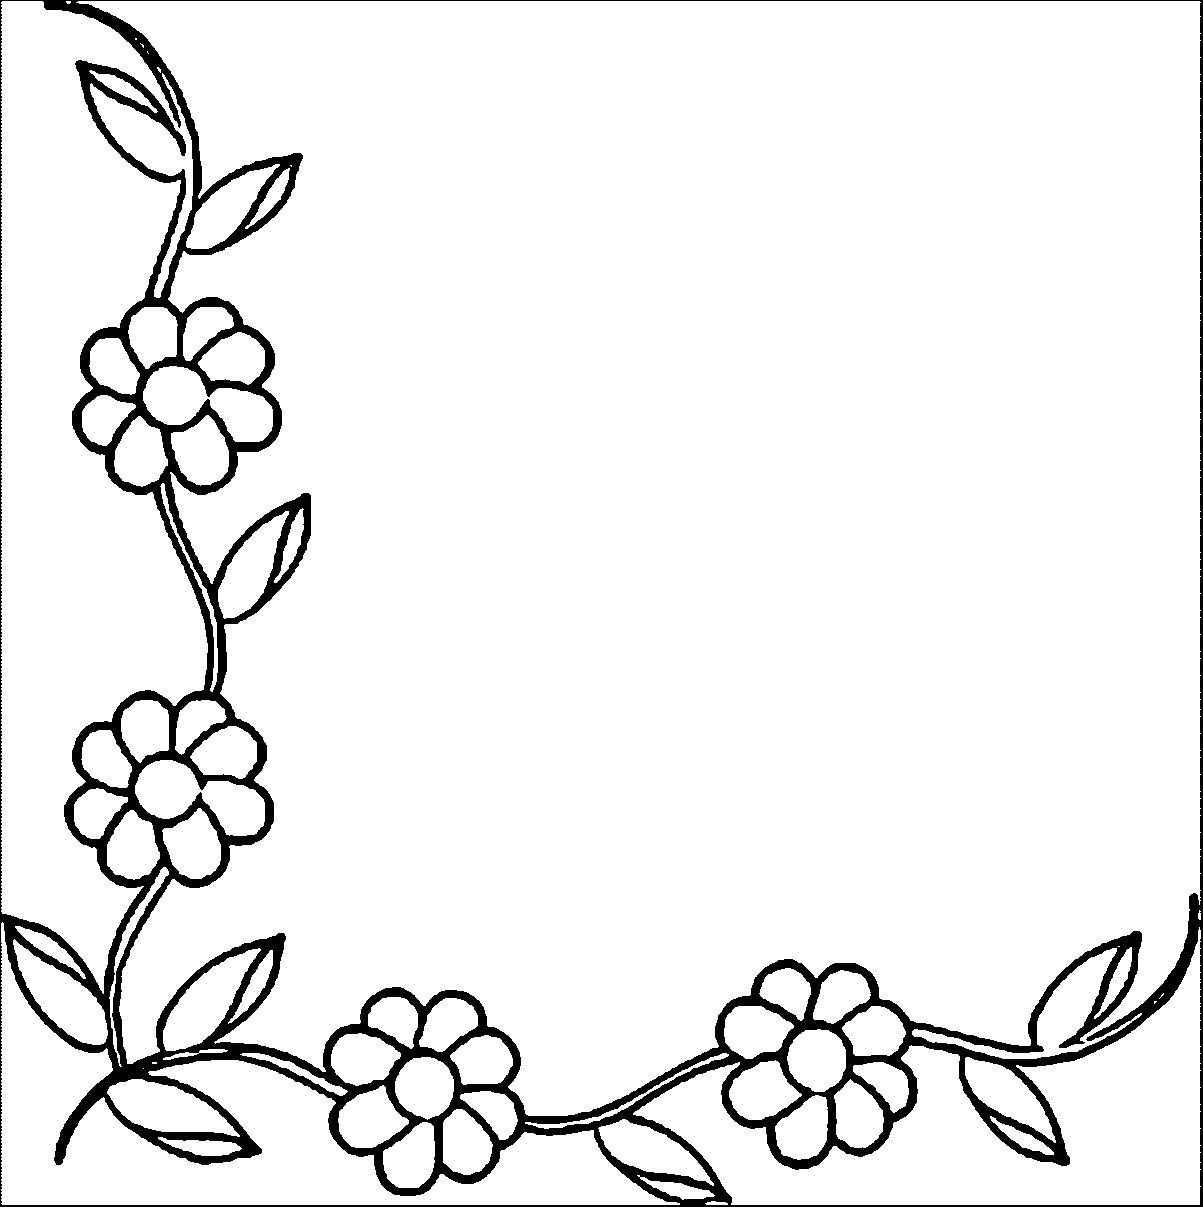 coloring-borders-clipart-best